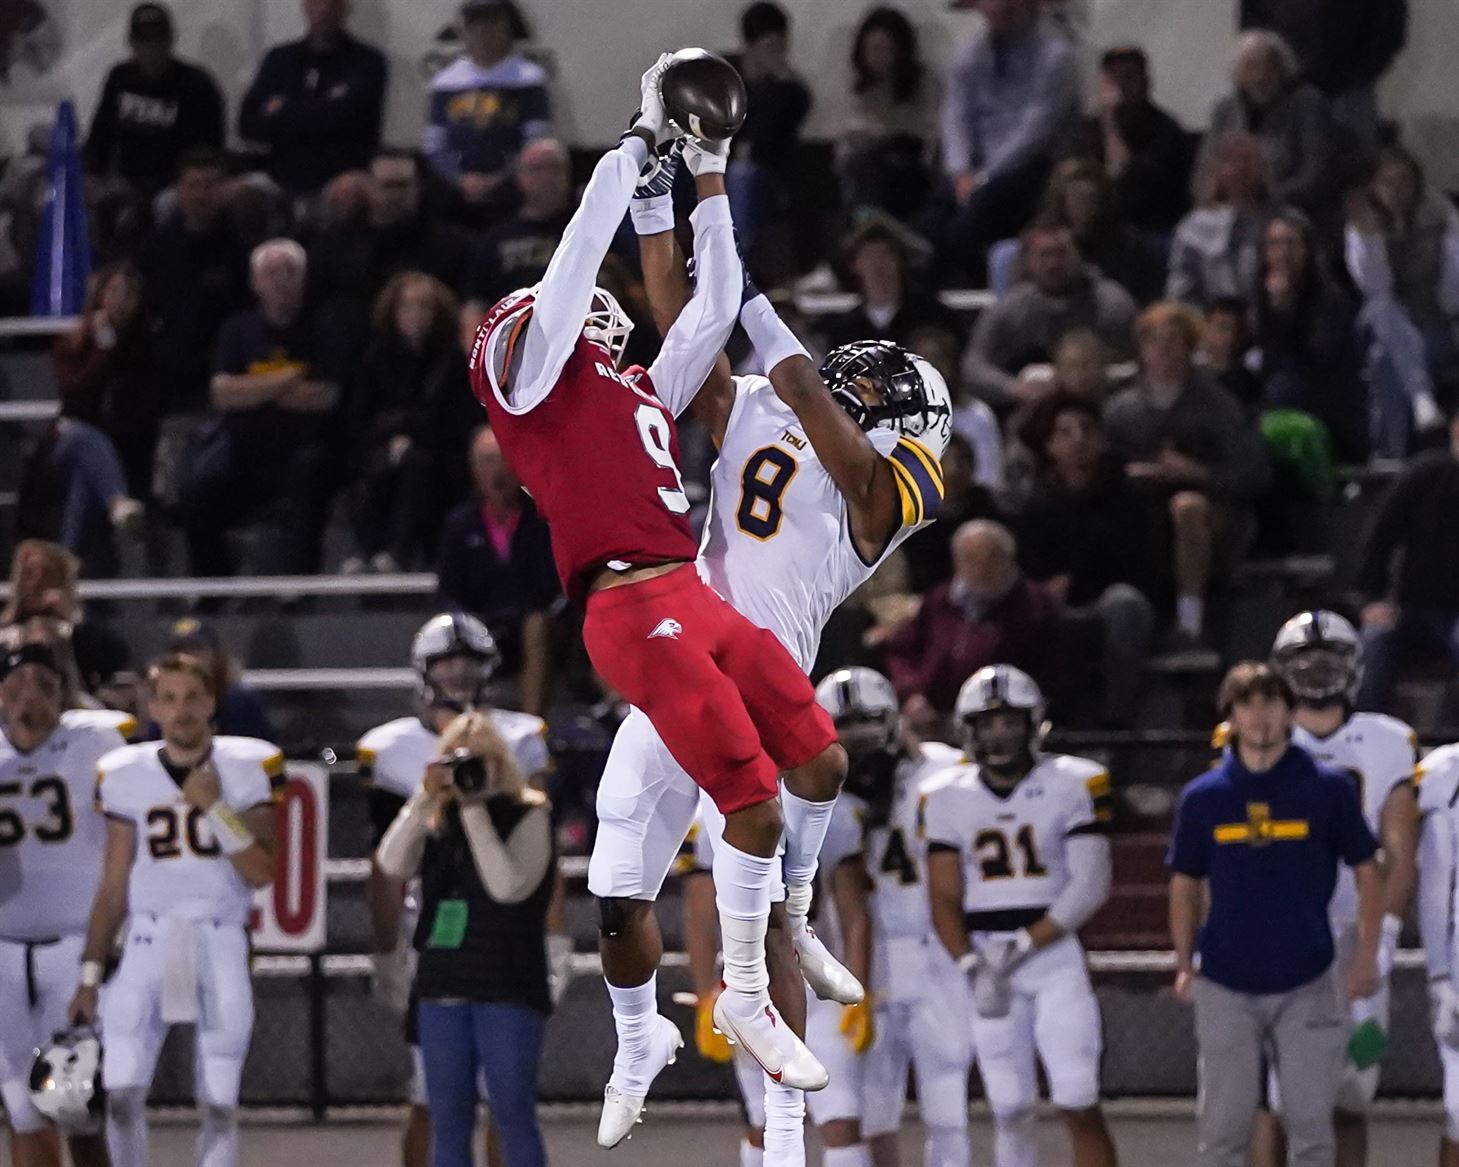 Junior wide receiver Clarence Wilkins reaches up to grab a pass over a defender from The College of New Jersey. Photo courtesy of David Venezia